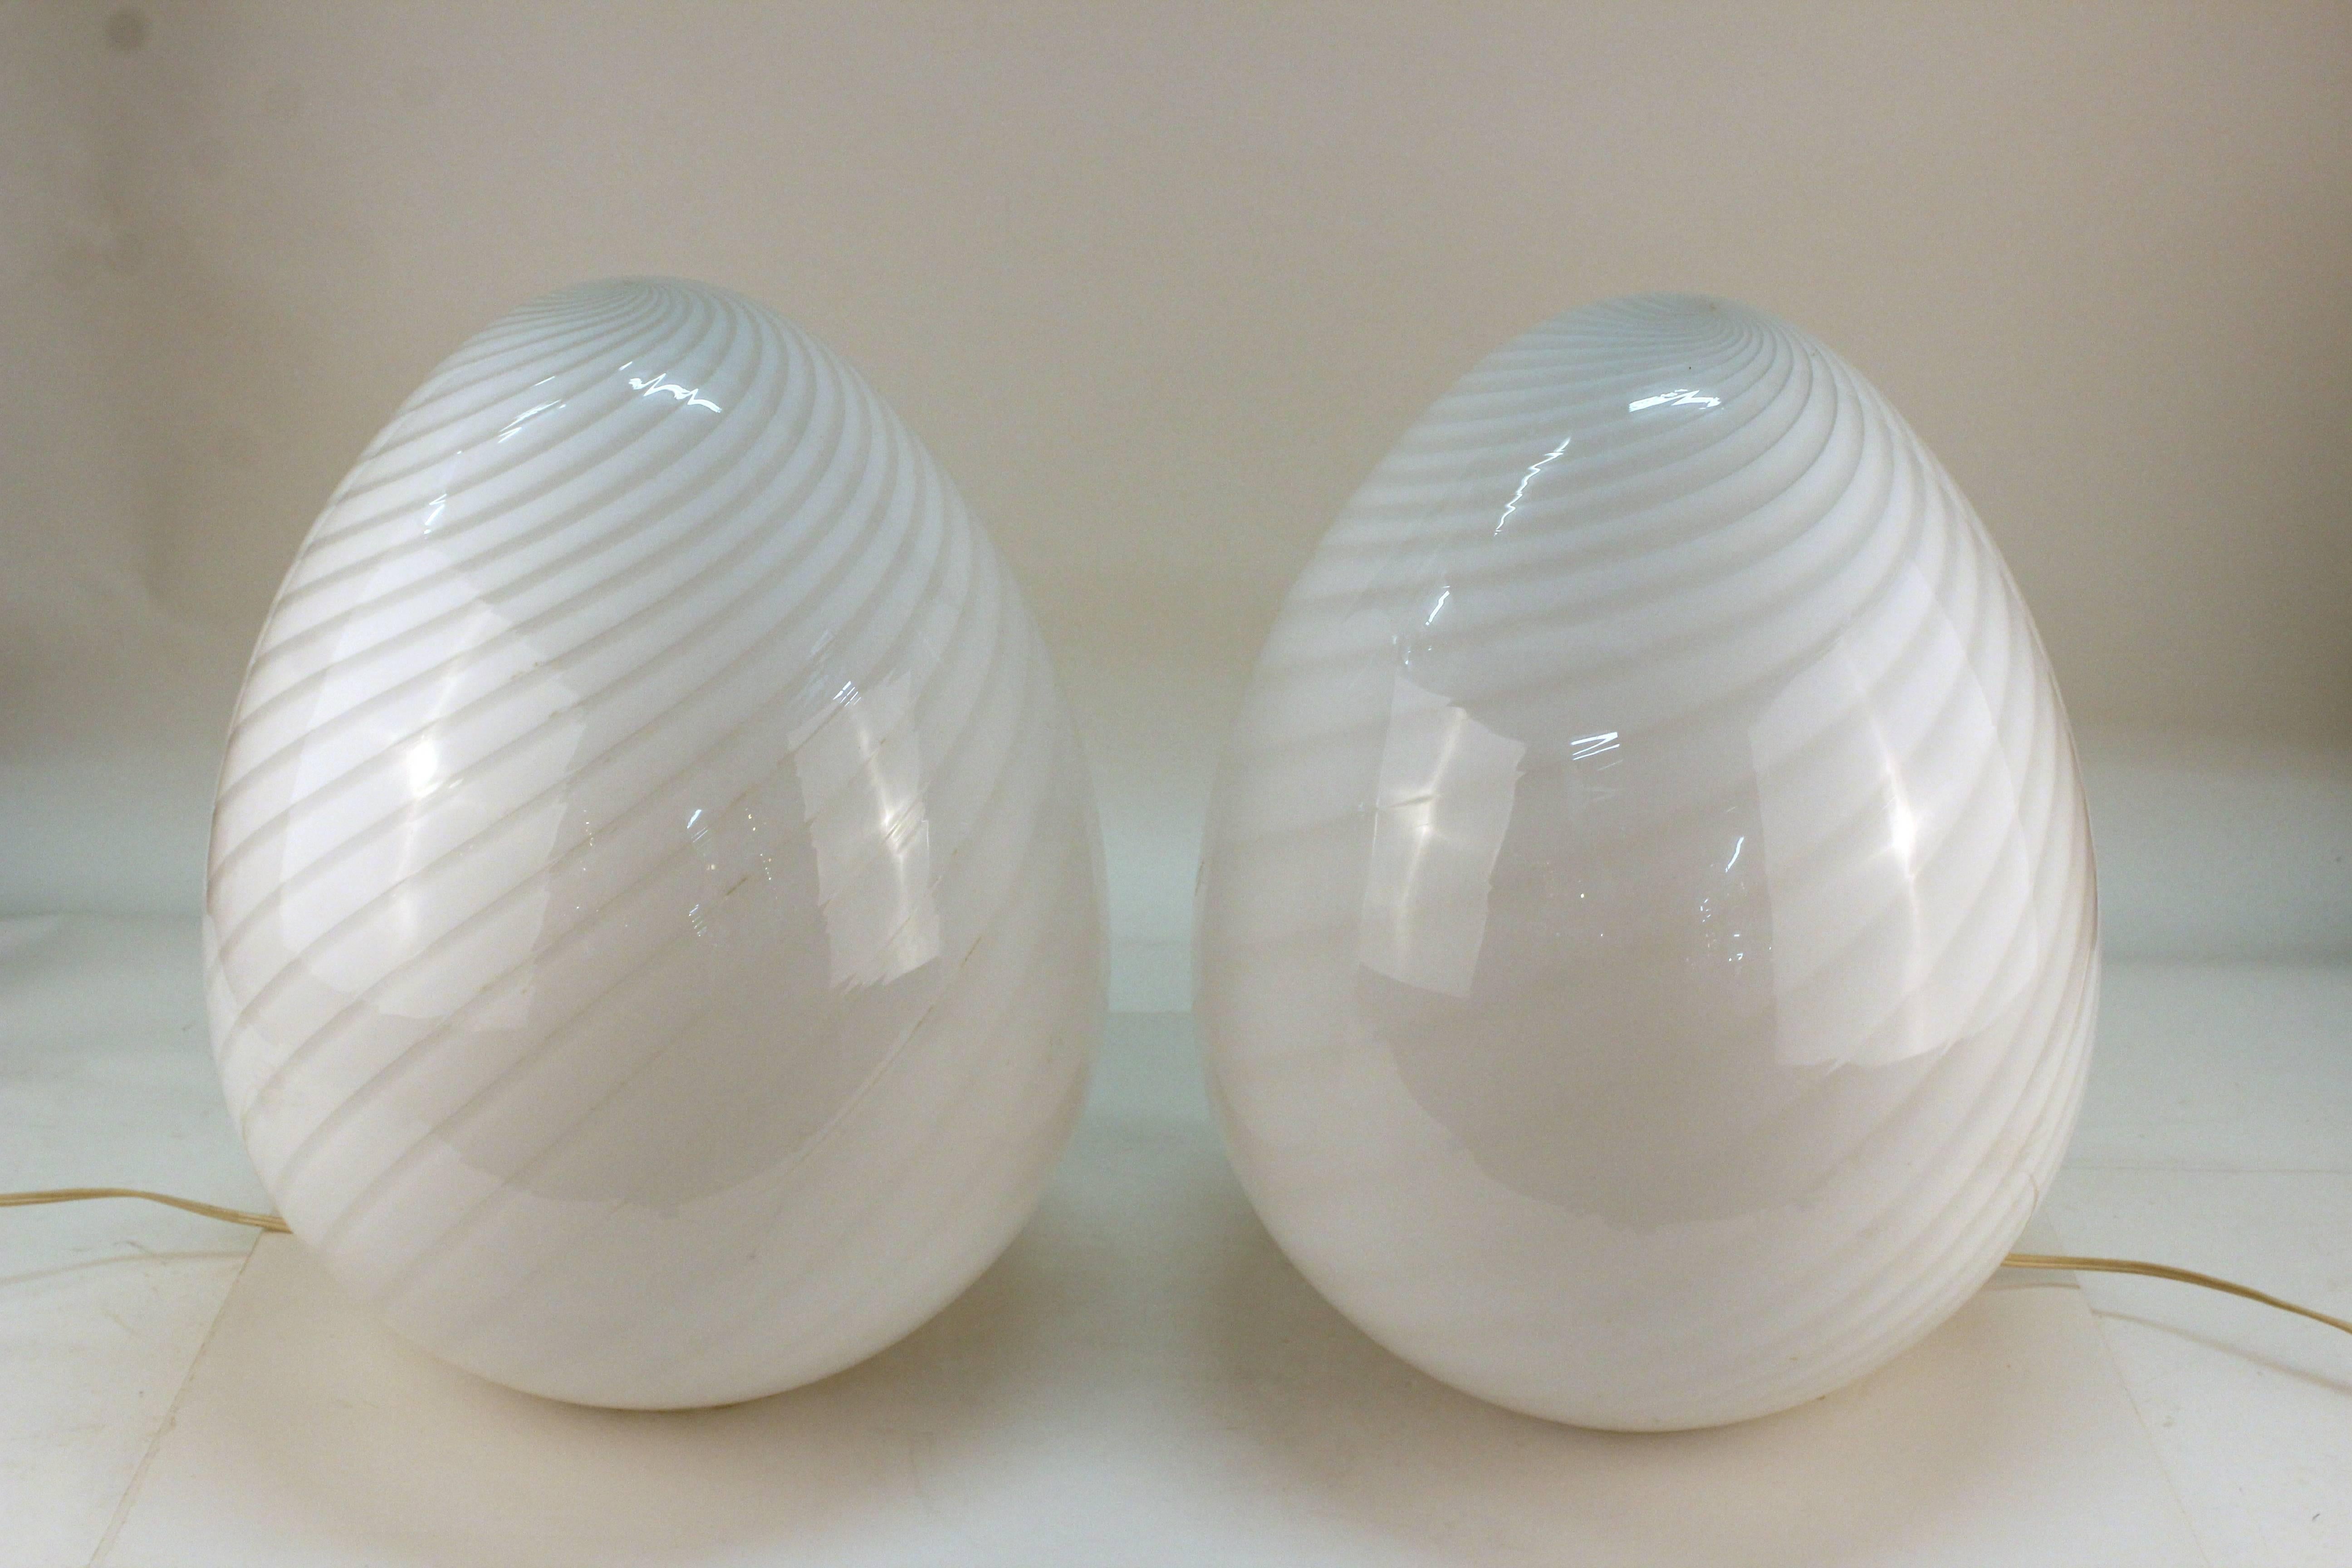 Pair of white swirled blown glass egg lamps. Produced on the Isle of Murano. Both are in excellent condition.